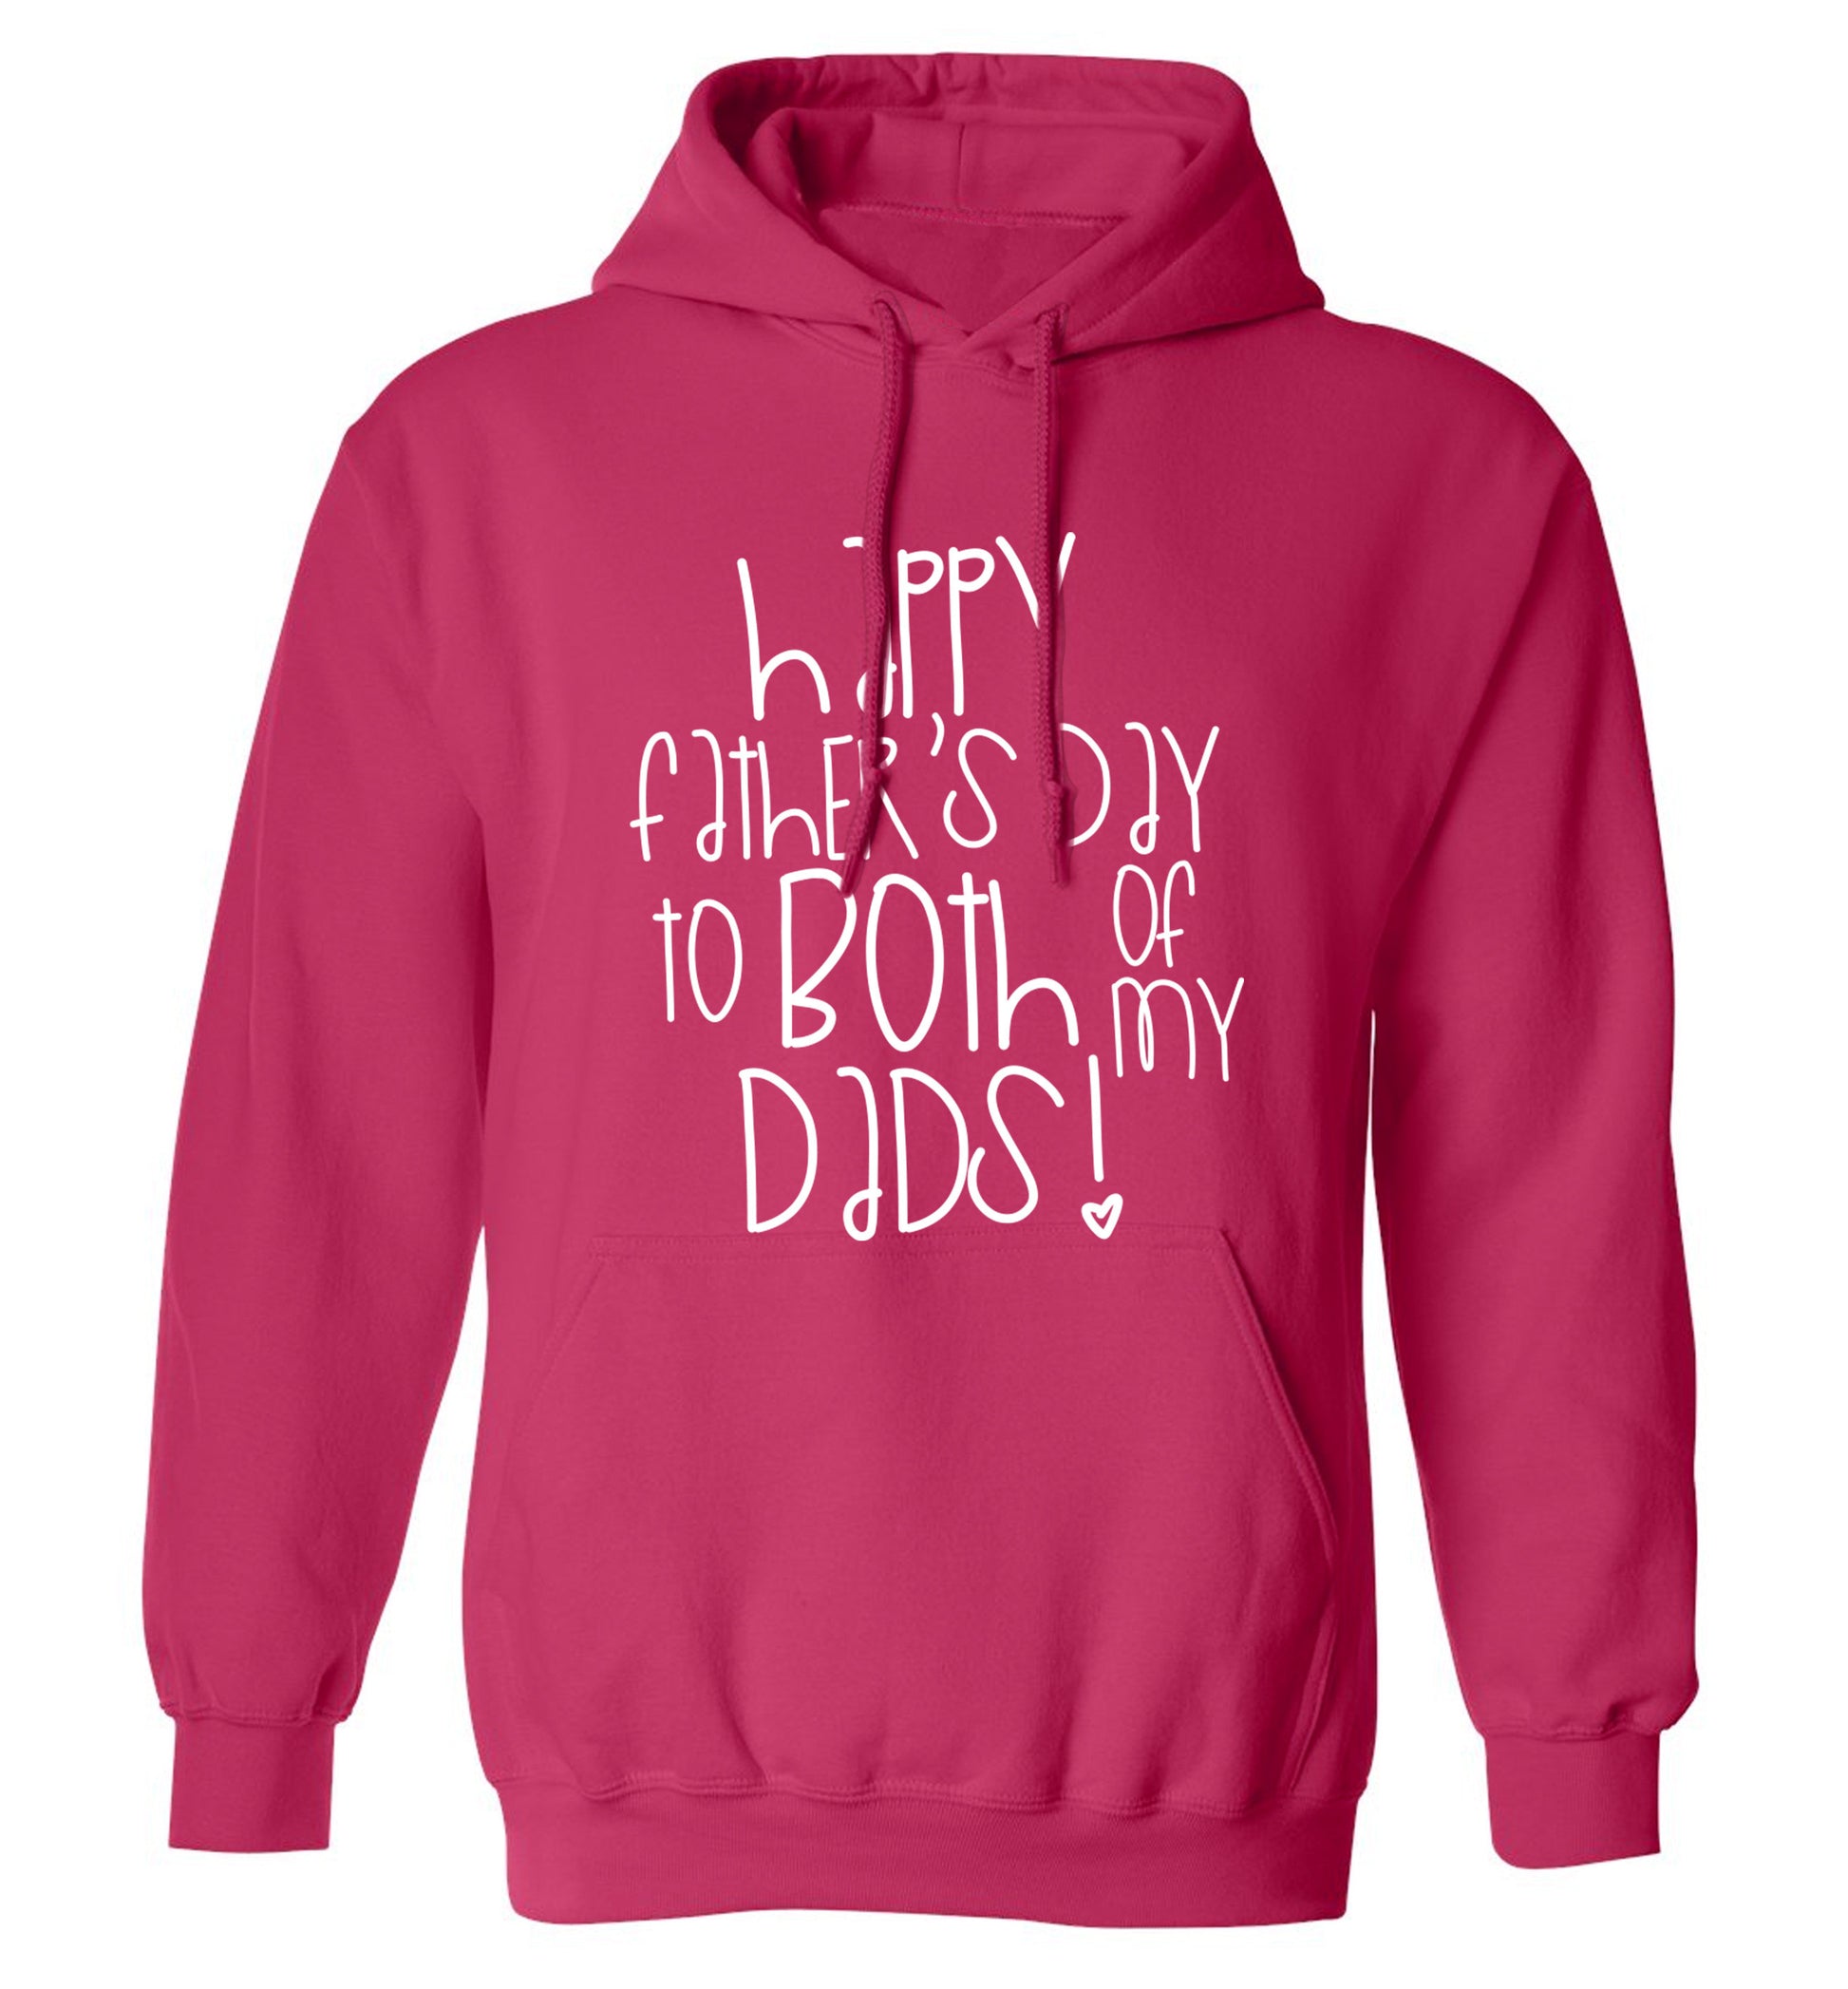 Happy father's day to both of my dads adults unisex pink hoodie 2XL